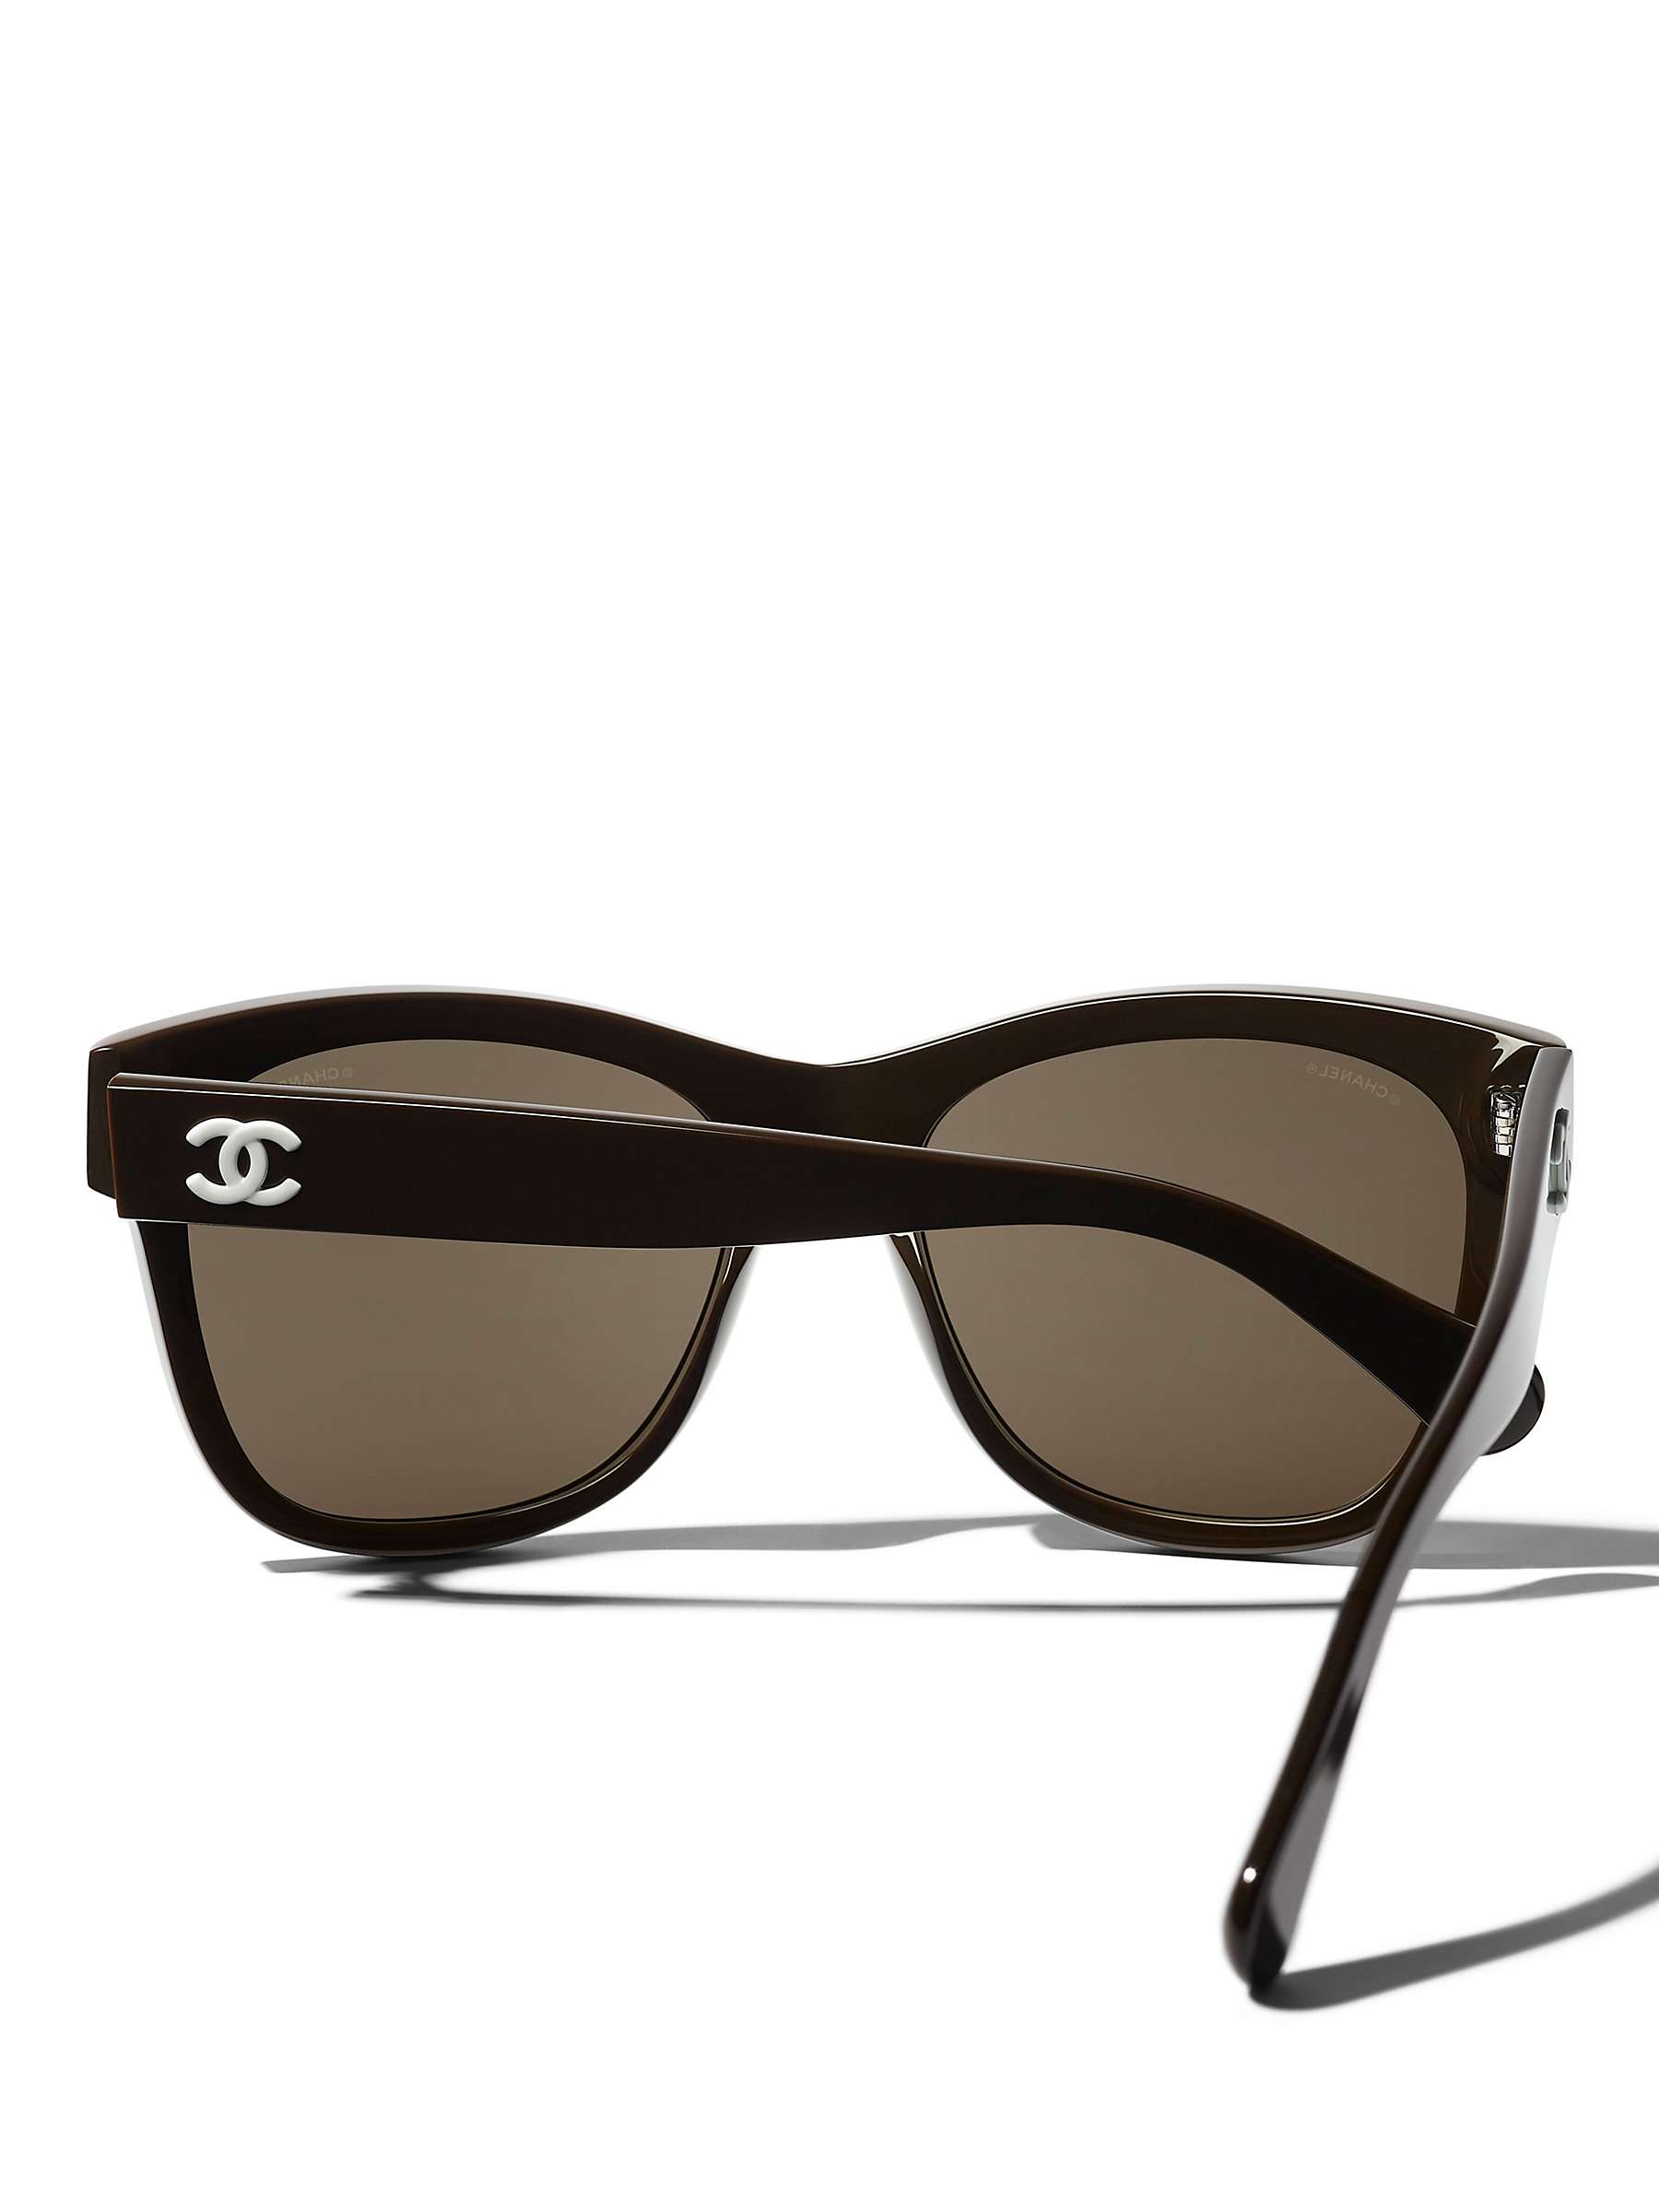 CHANEL Square Sunglasses CH5380 Brown at John Lewis & Partners